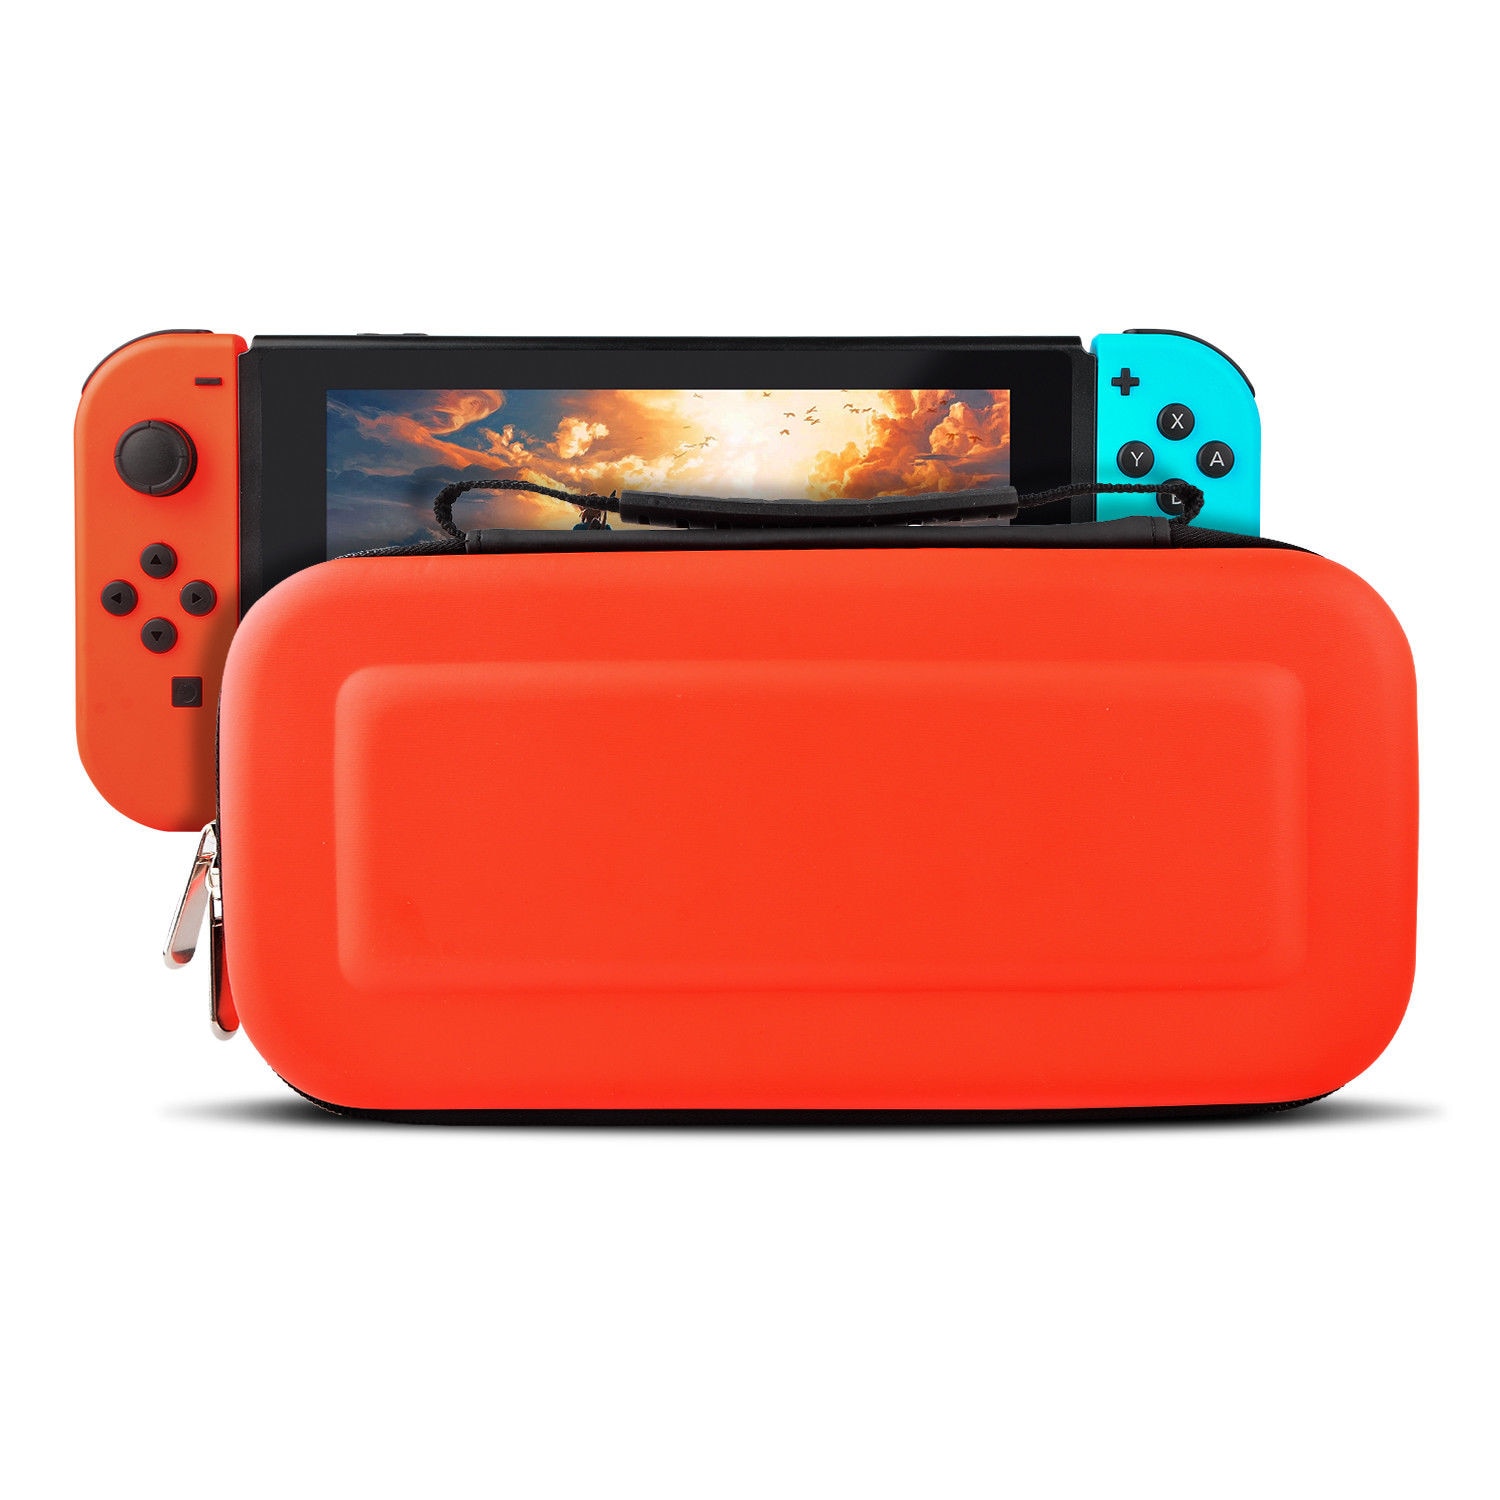 OSTENT Hard Travel Carry Case Bag Pocket voor Nintendo Switch Console